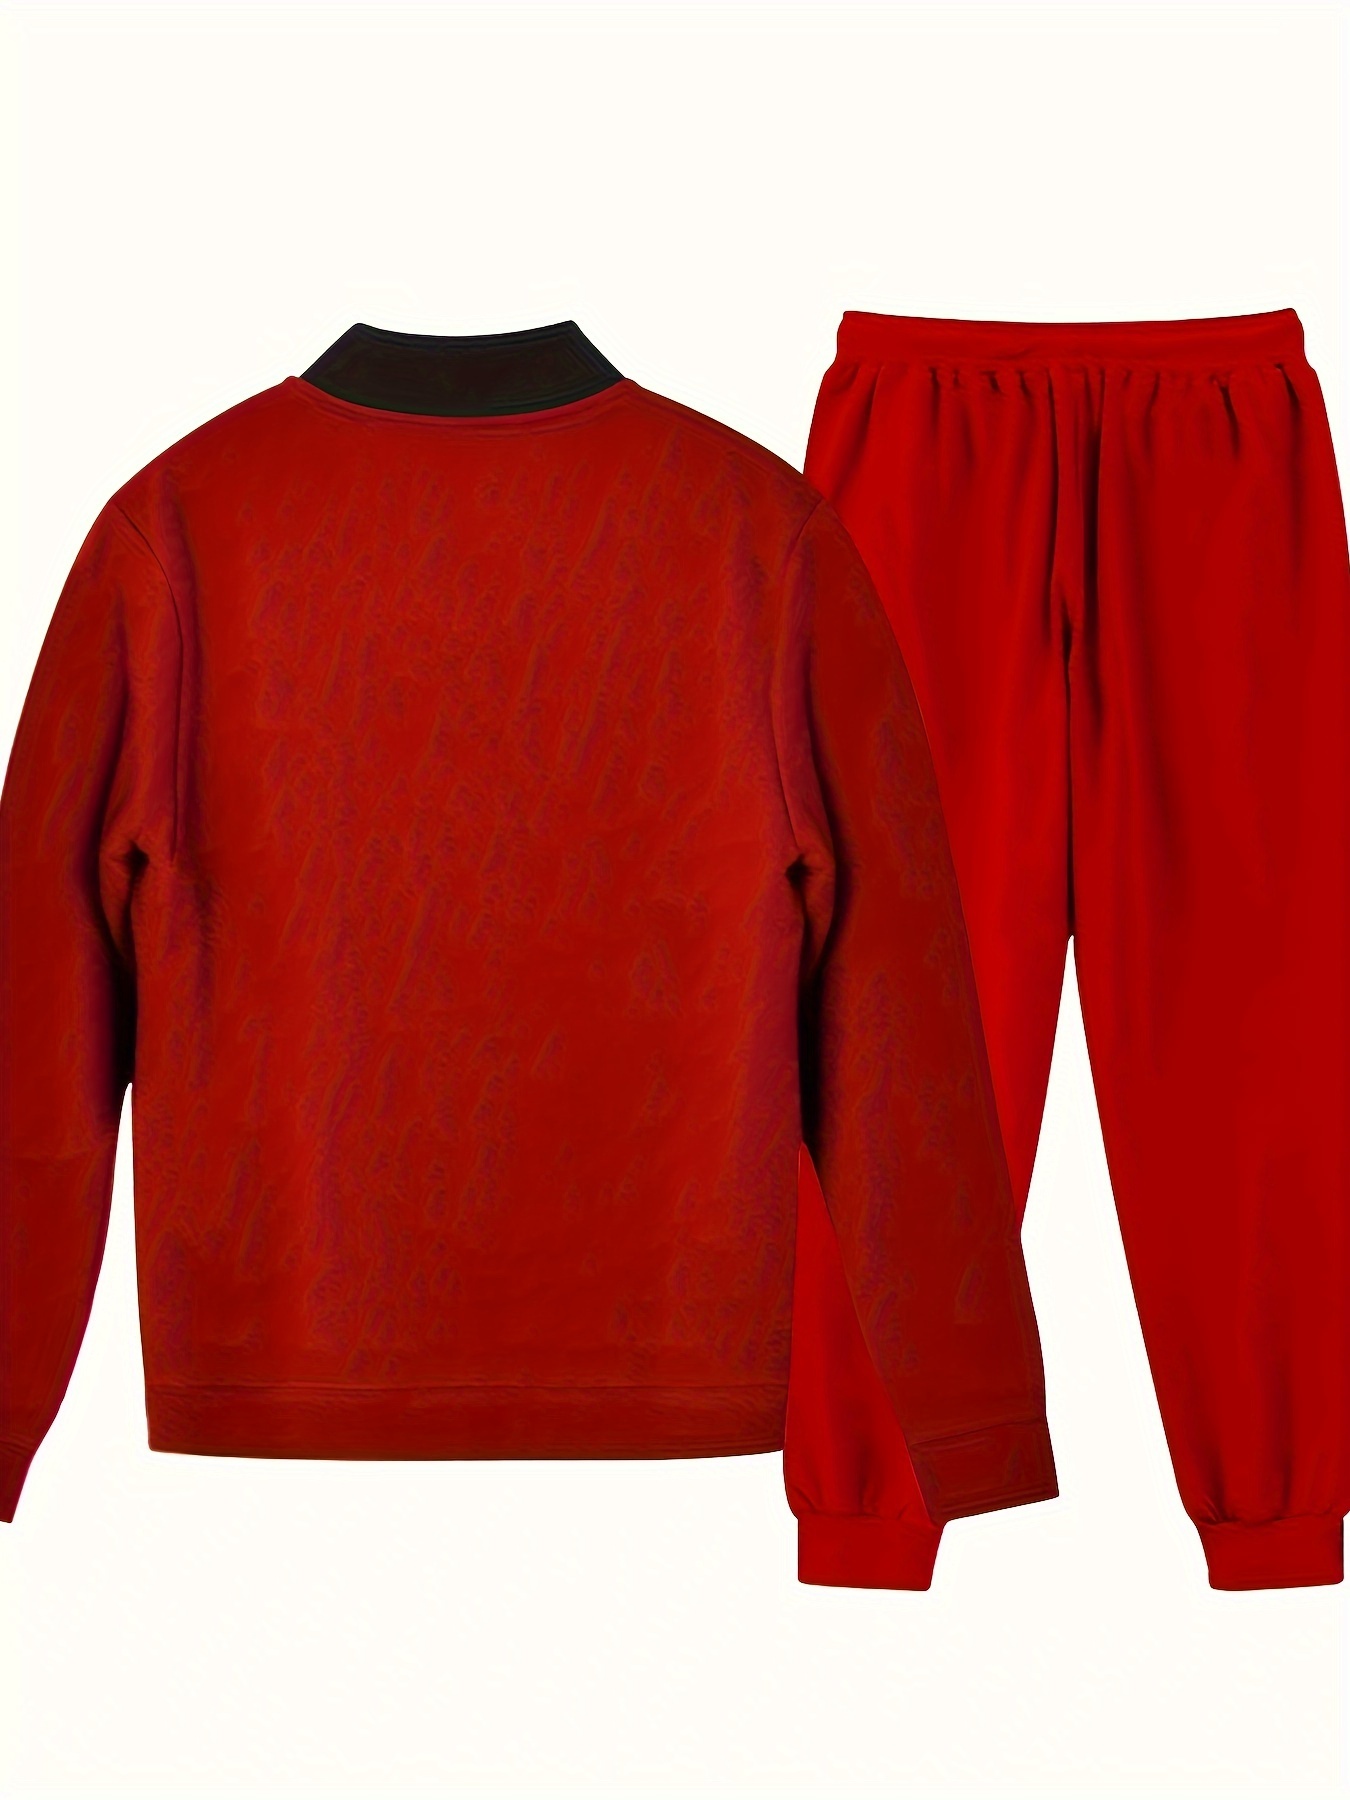 ChoiceApparel Mens Athletic 2 Piece Tracksuit Set (M, 888-Red) at   Men's Clothing store